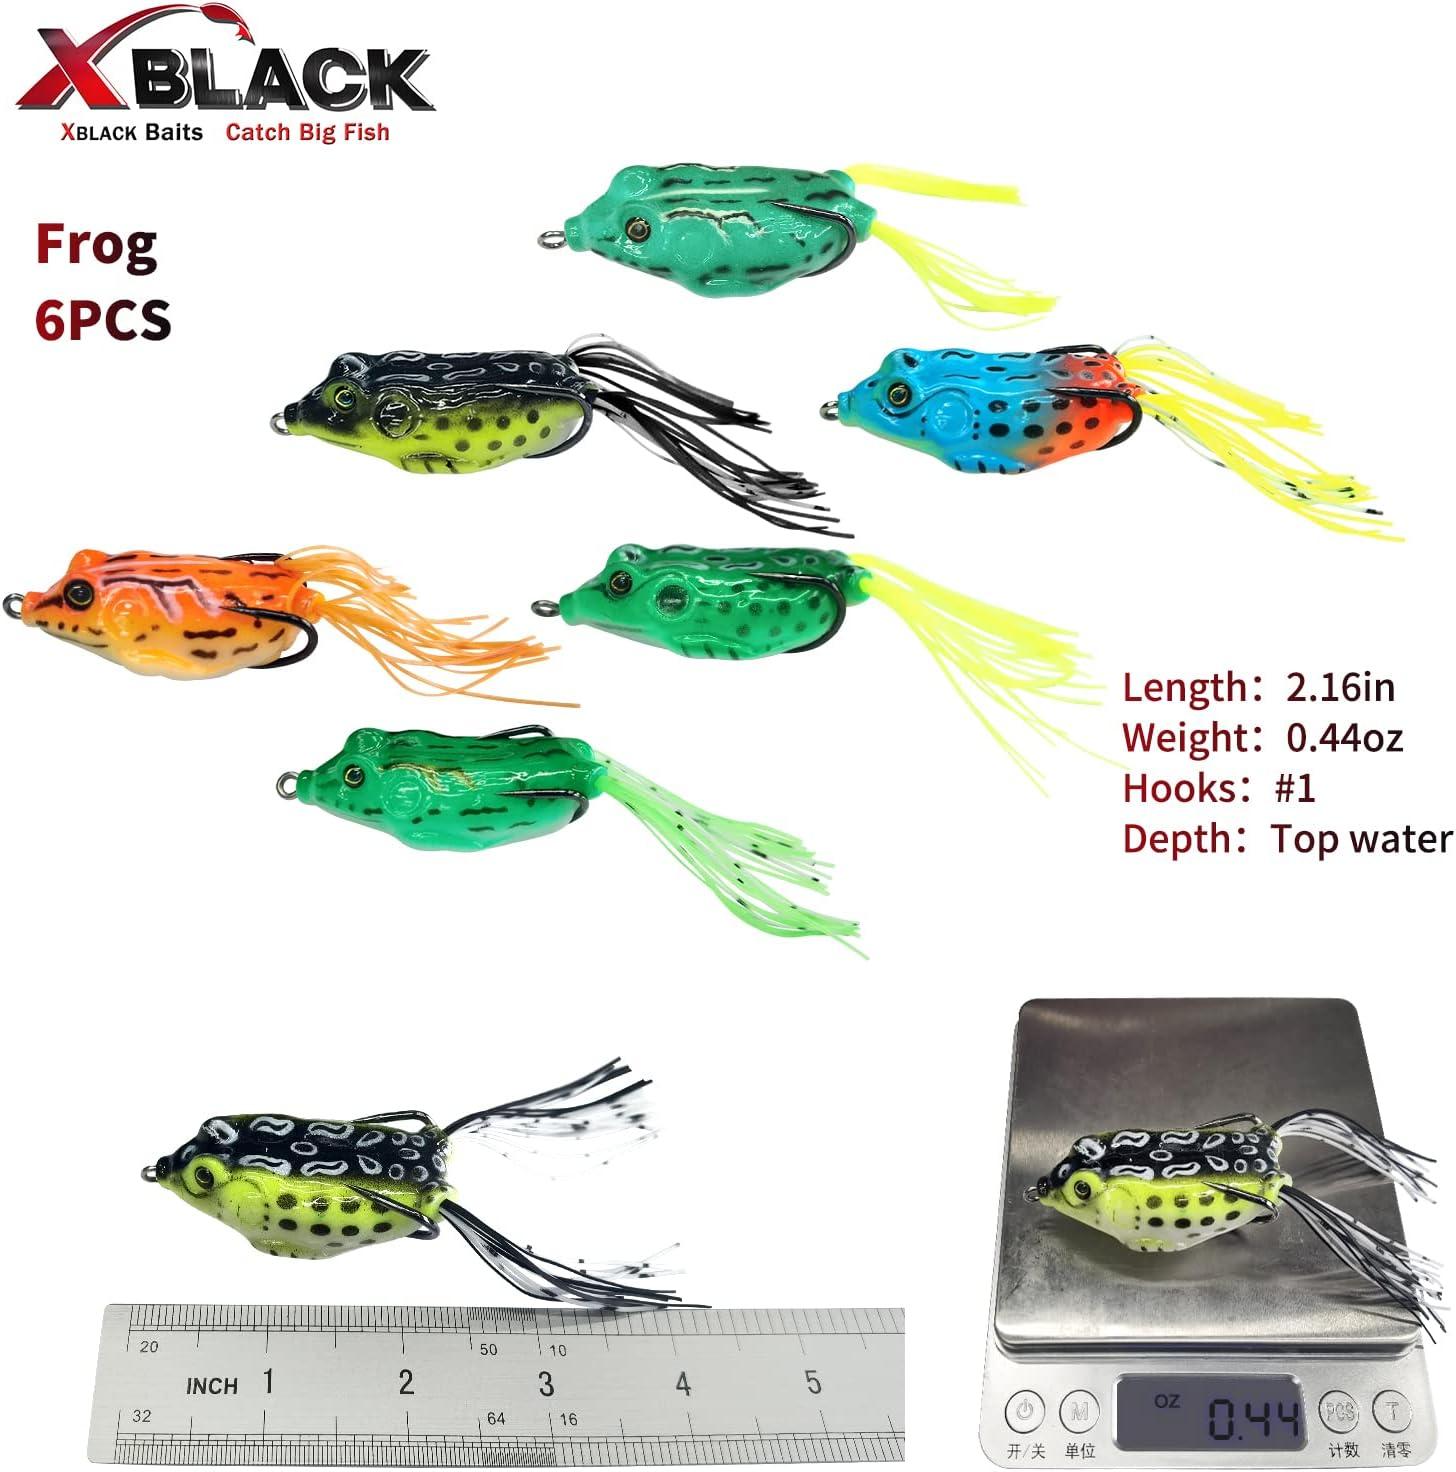 XBLACK Minnow Lures Set Hard Fishing Lures Set 5PCS Mixed Size and Color  for Bass Trout in Saltwater and Freshwater, XBLACK Baits, Catch Big Fish!